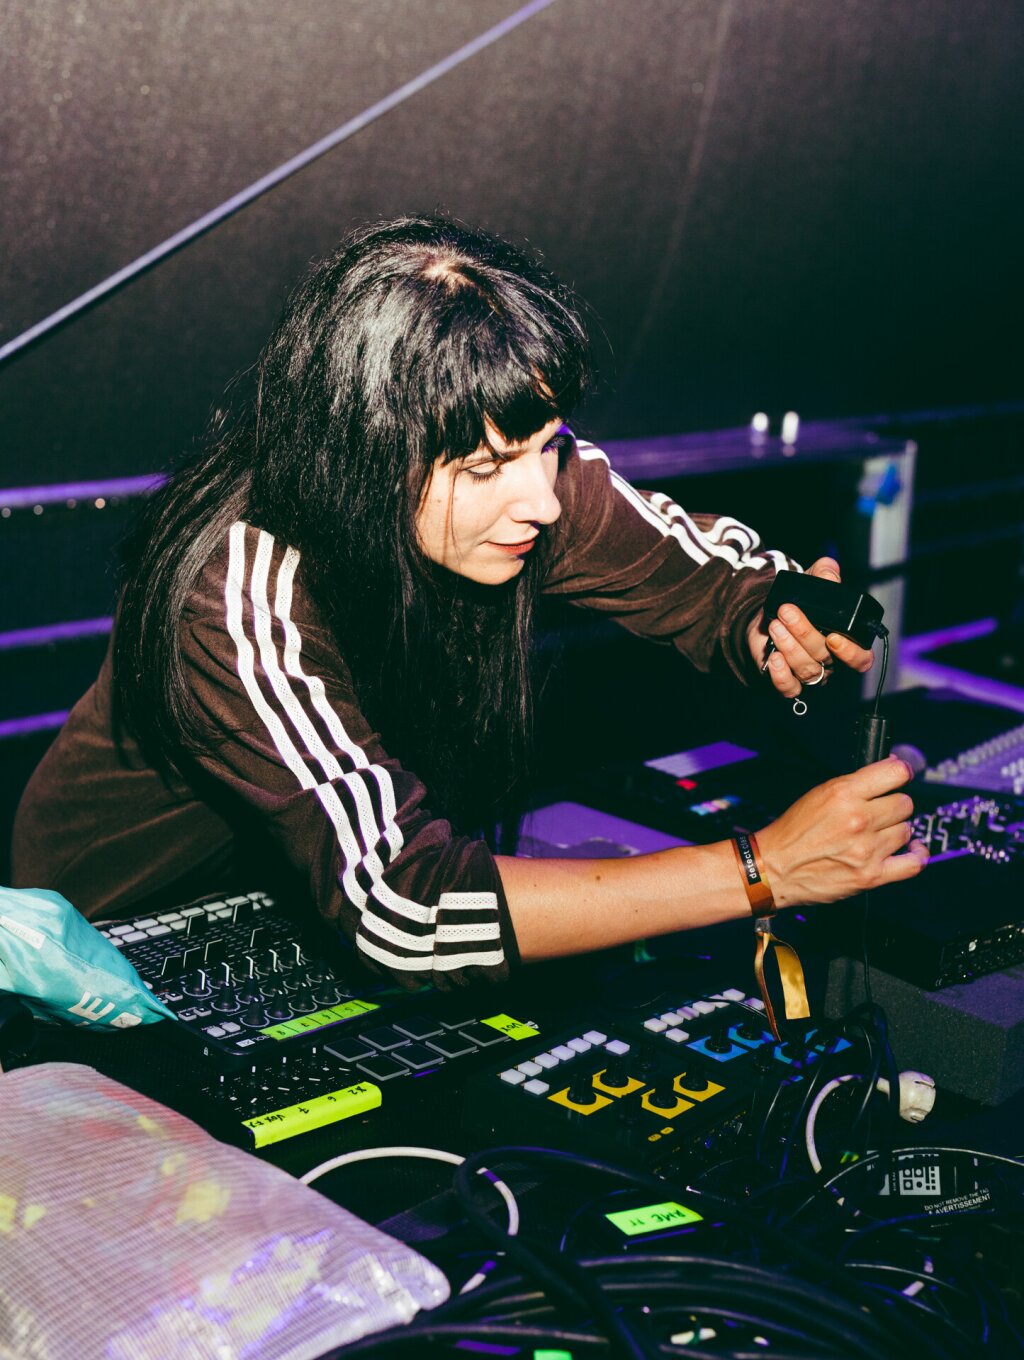 A woman preparing the technical setup for her electronic live act.